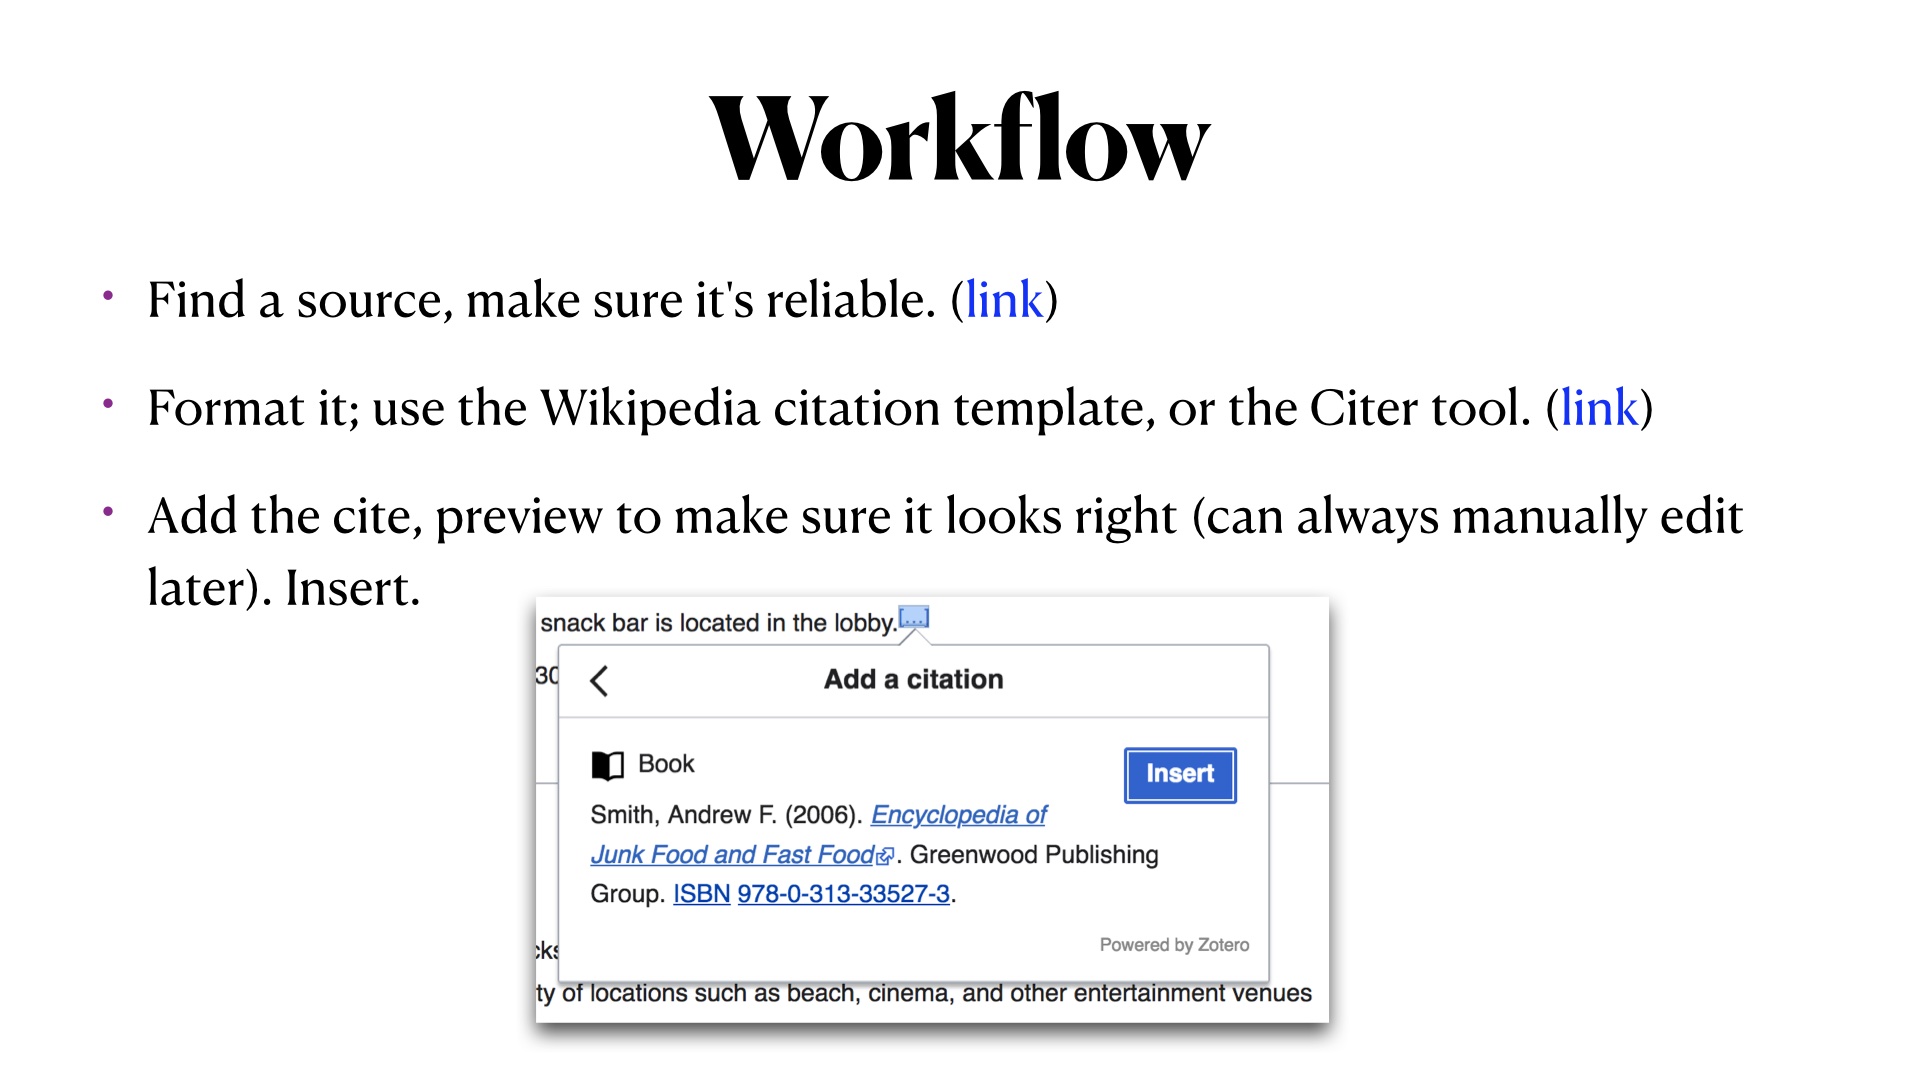 Workflow. Find a source, make sure it's reliable. (link)
Format it; use the Wikipedia citation template, or the Citer tool. (link)
Add the cite, preview to make sure it looks right (can always manually edit later). Insert. Screenshot of what a formatted citation looks like.